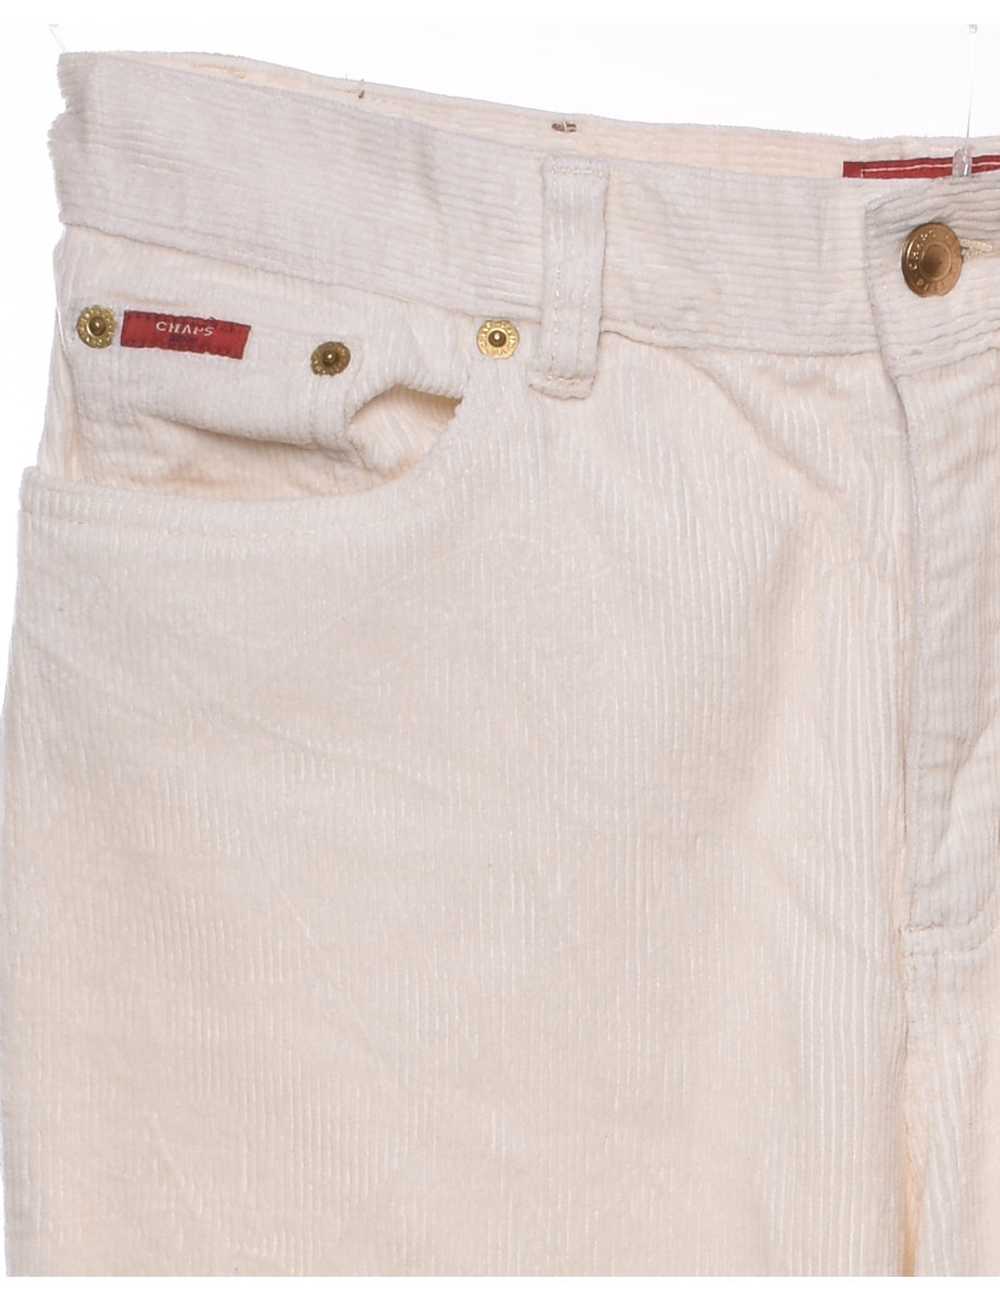 Chaps Off-White 1990s Corduroy Trousers - W31 L28 - image 3